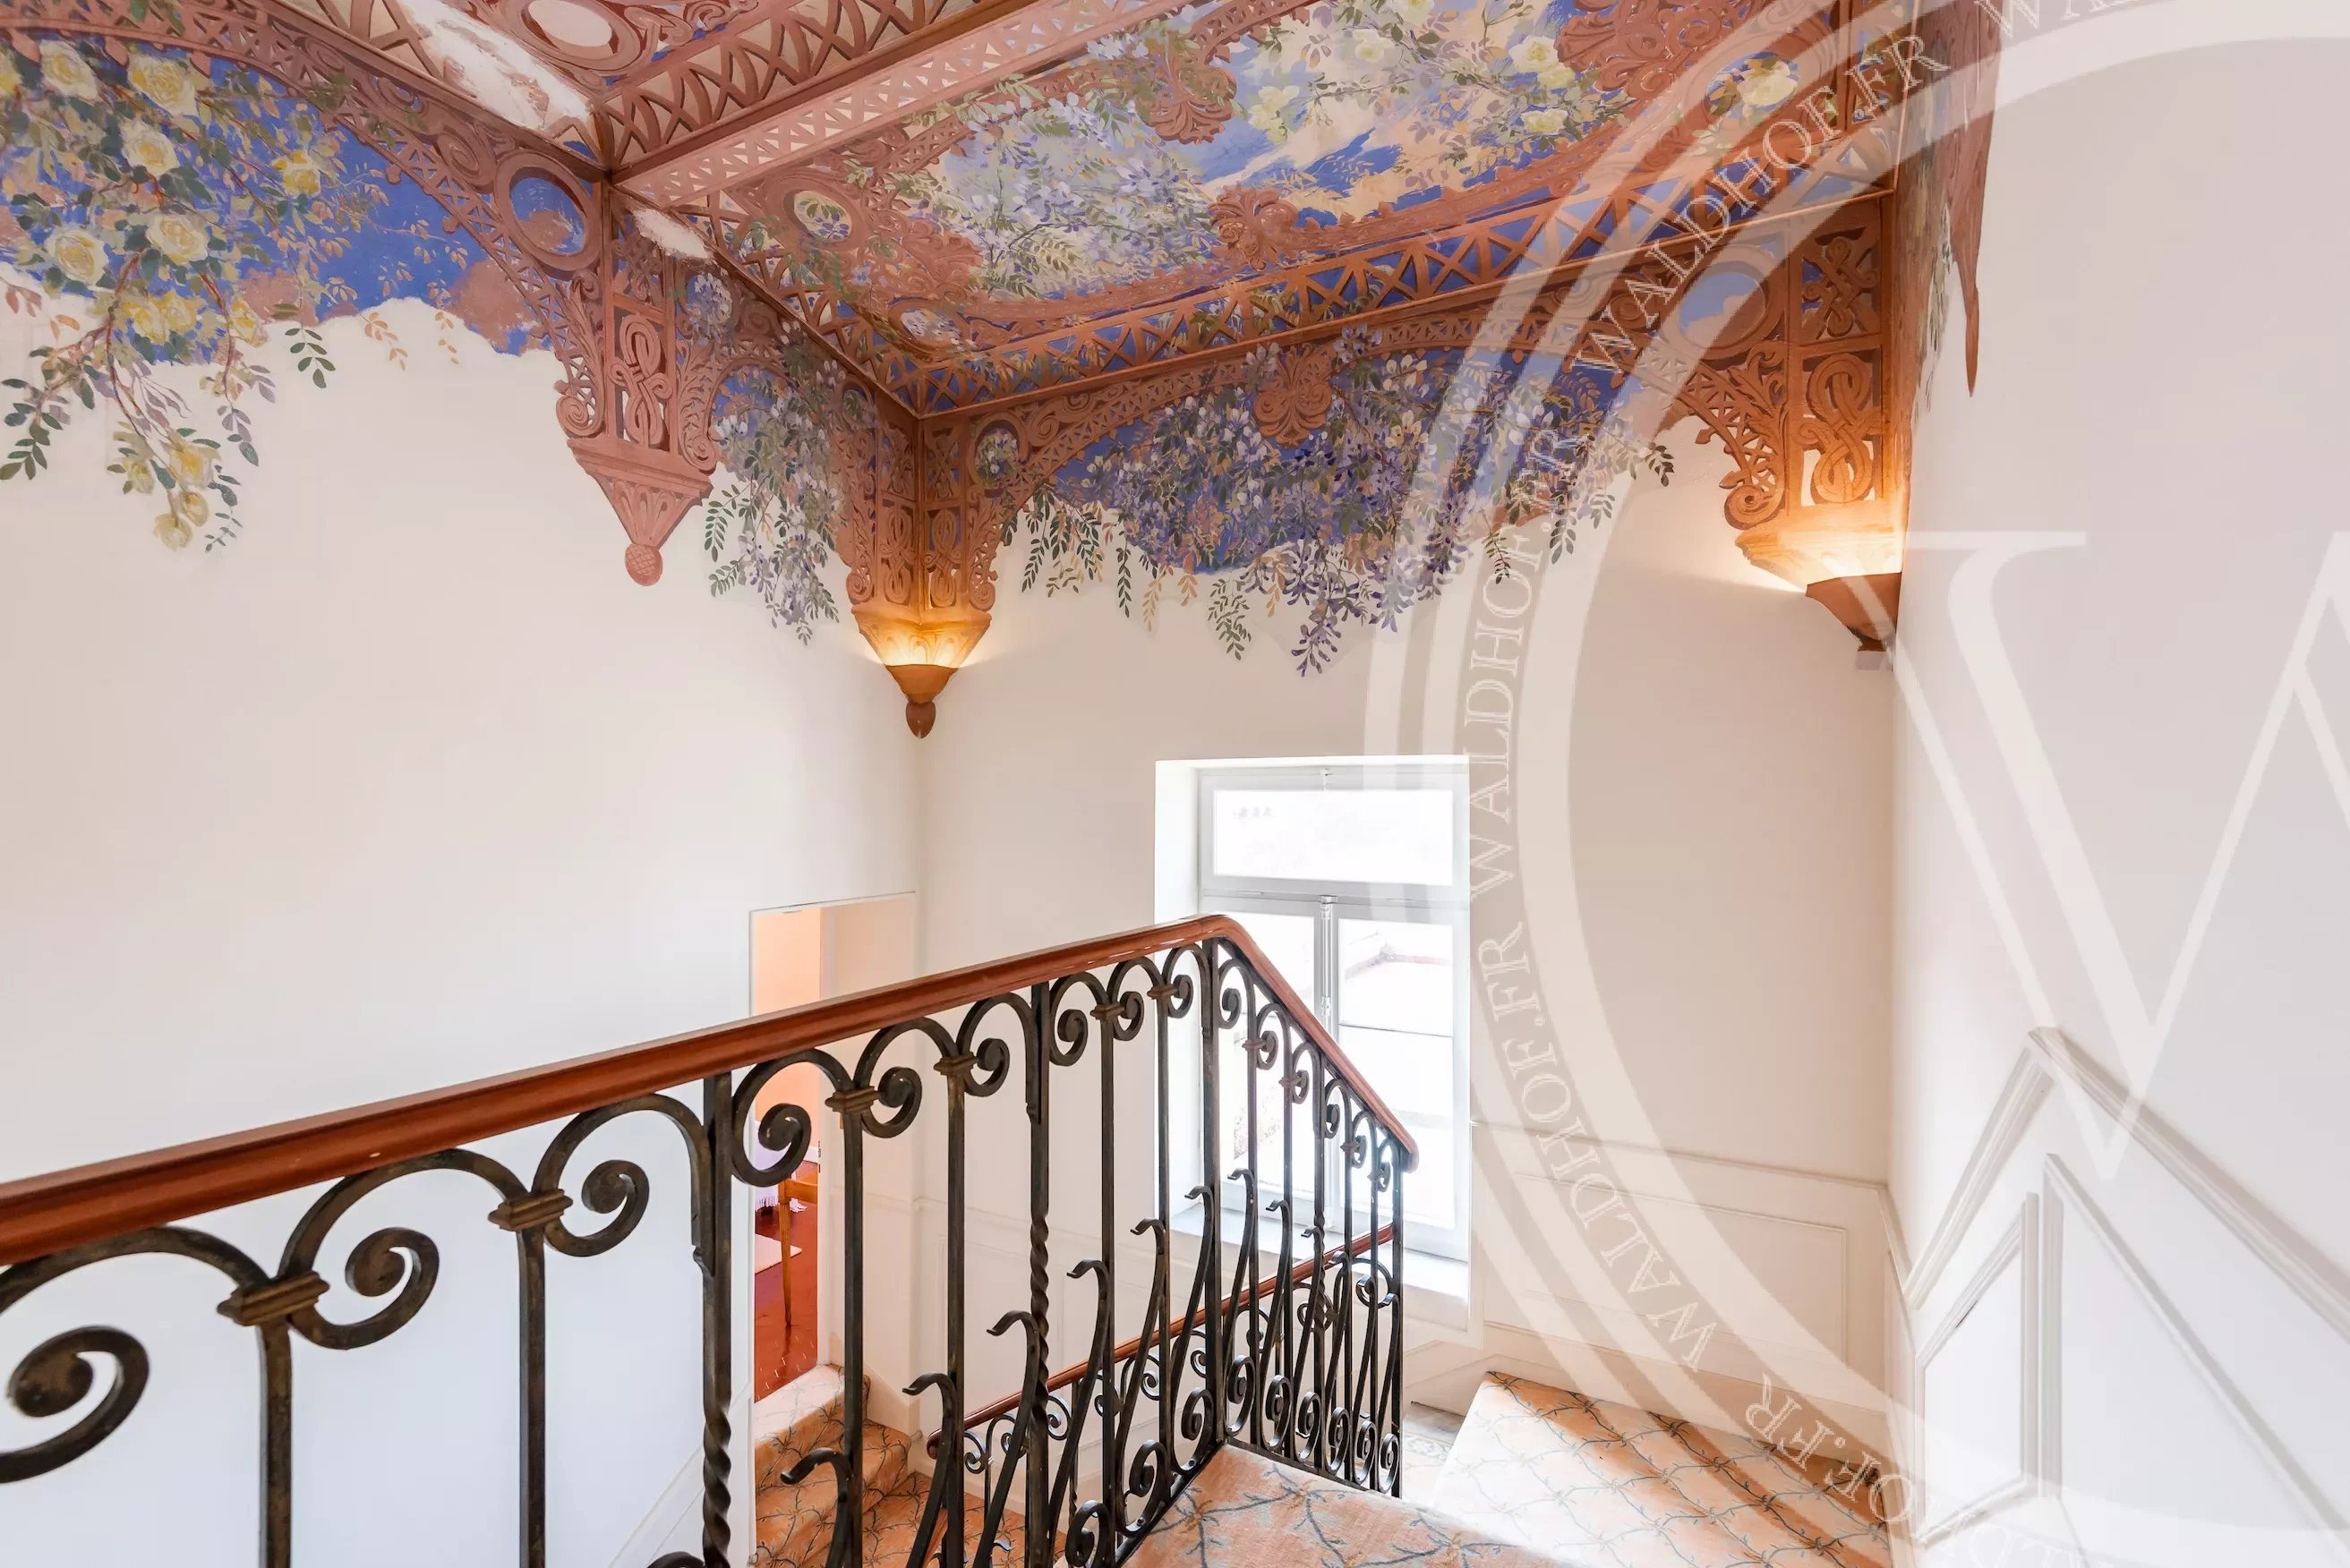 Magnificent Belle Epoque property in the heart of the Cap Martin